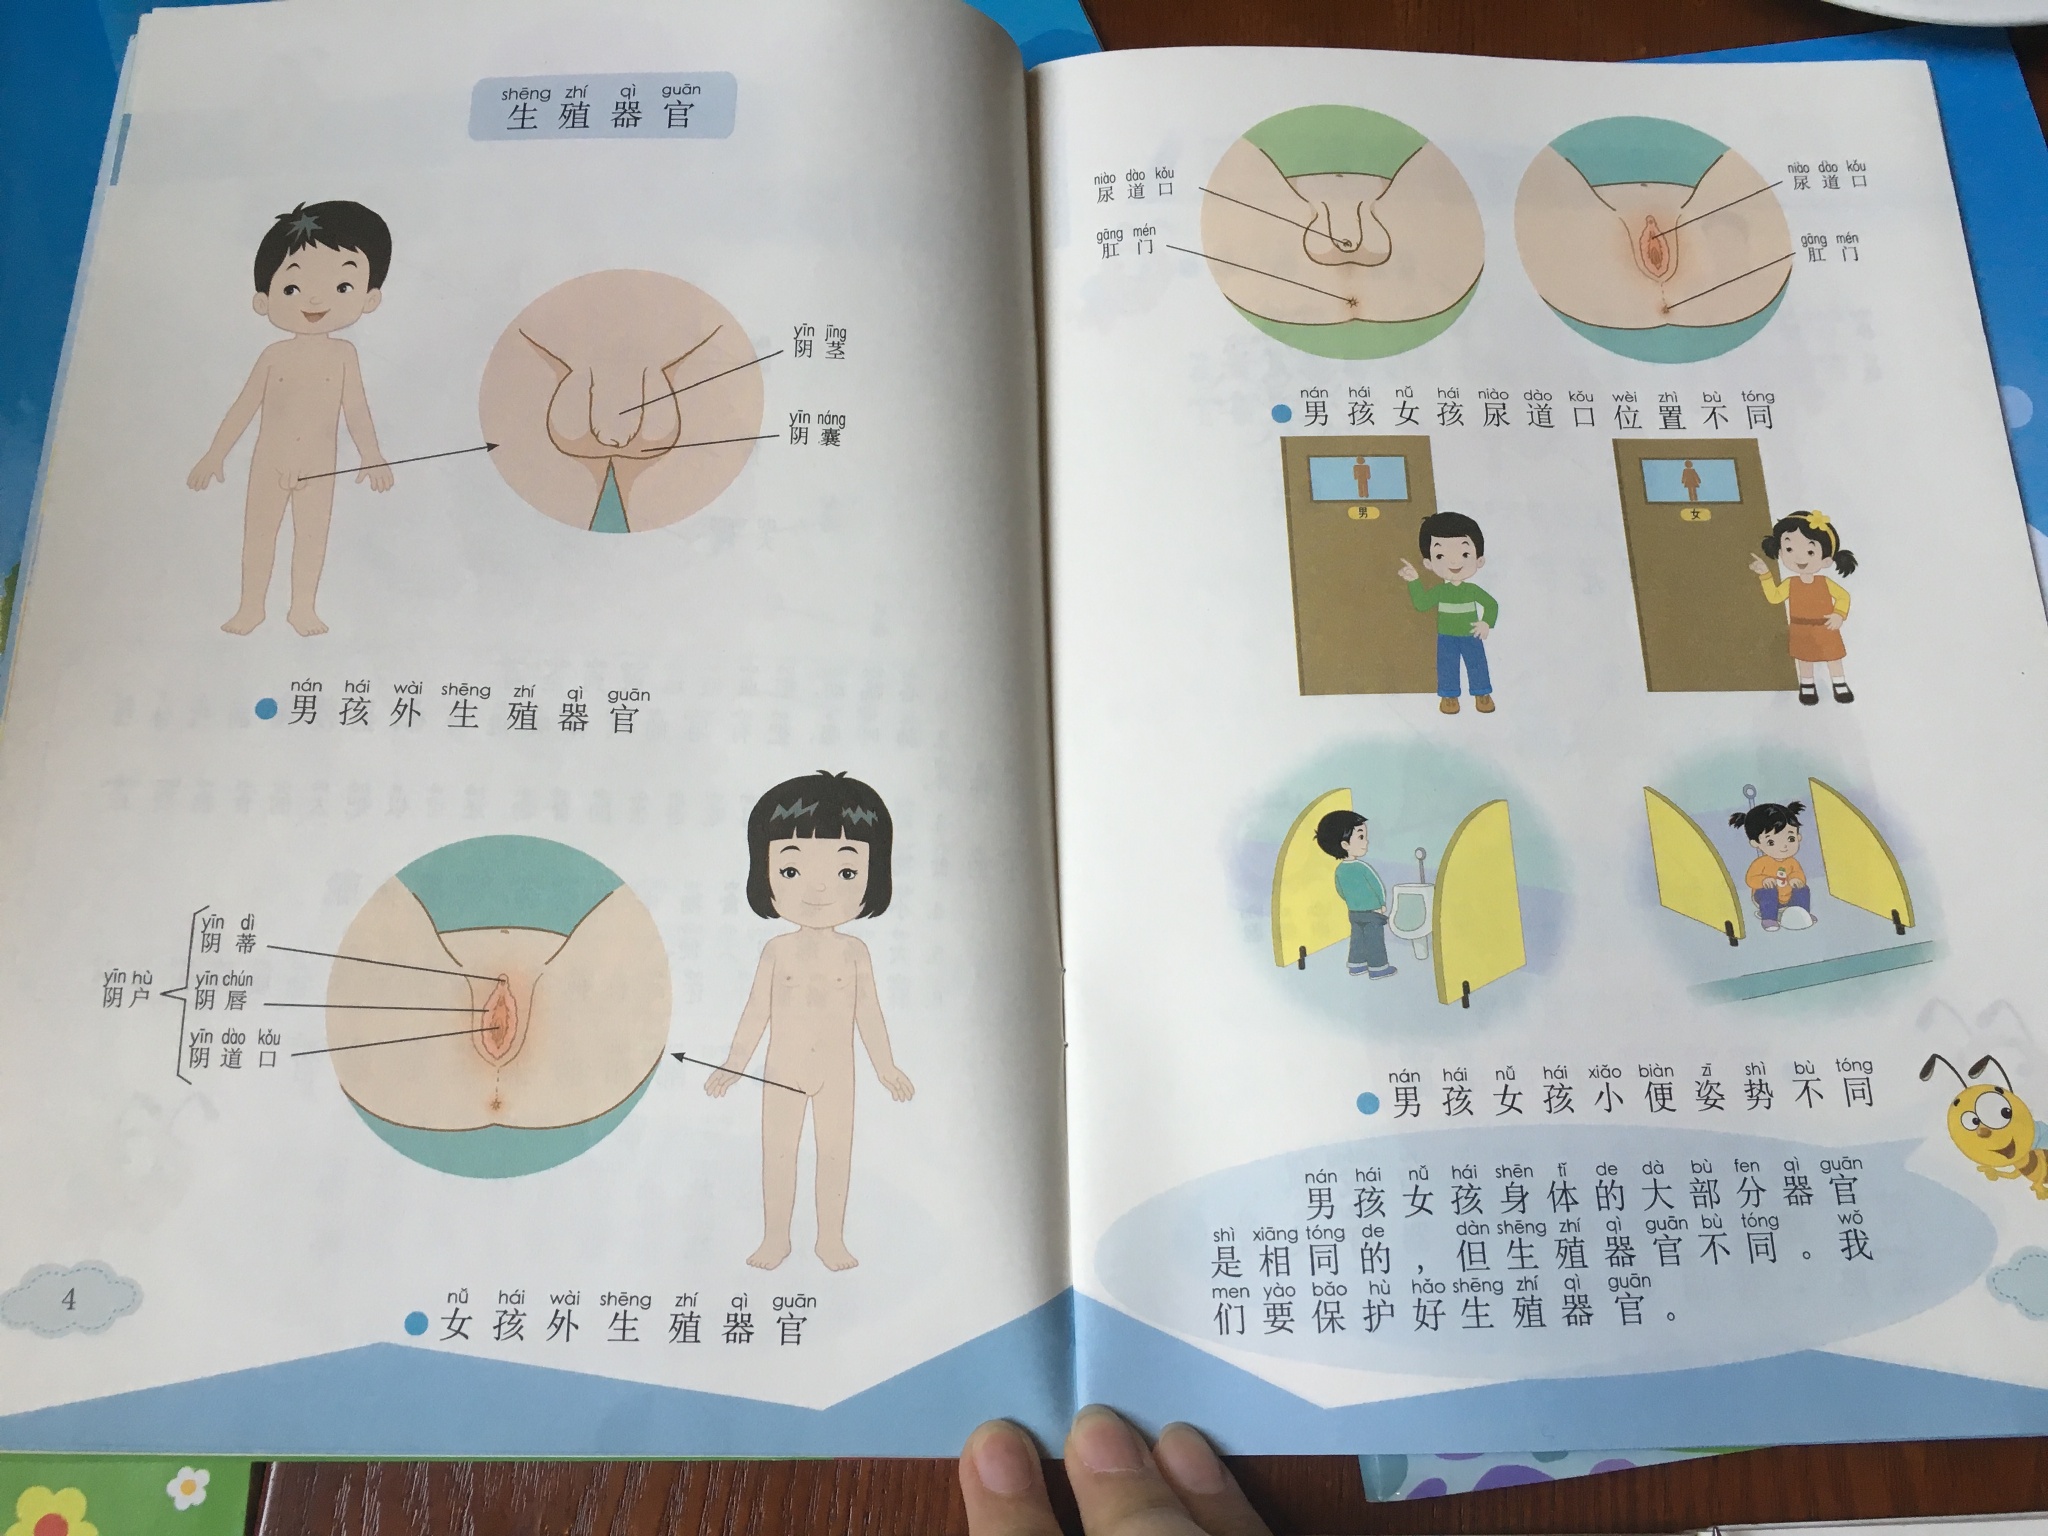 Knowledge of reproductive organs taught at primary one. (Source: Weibo)